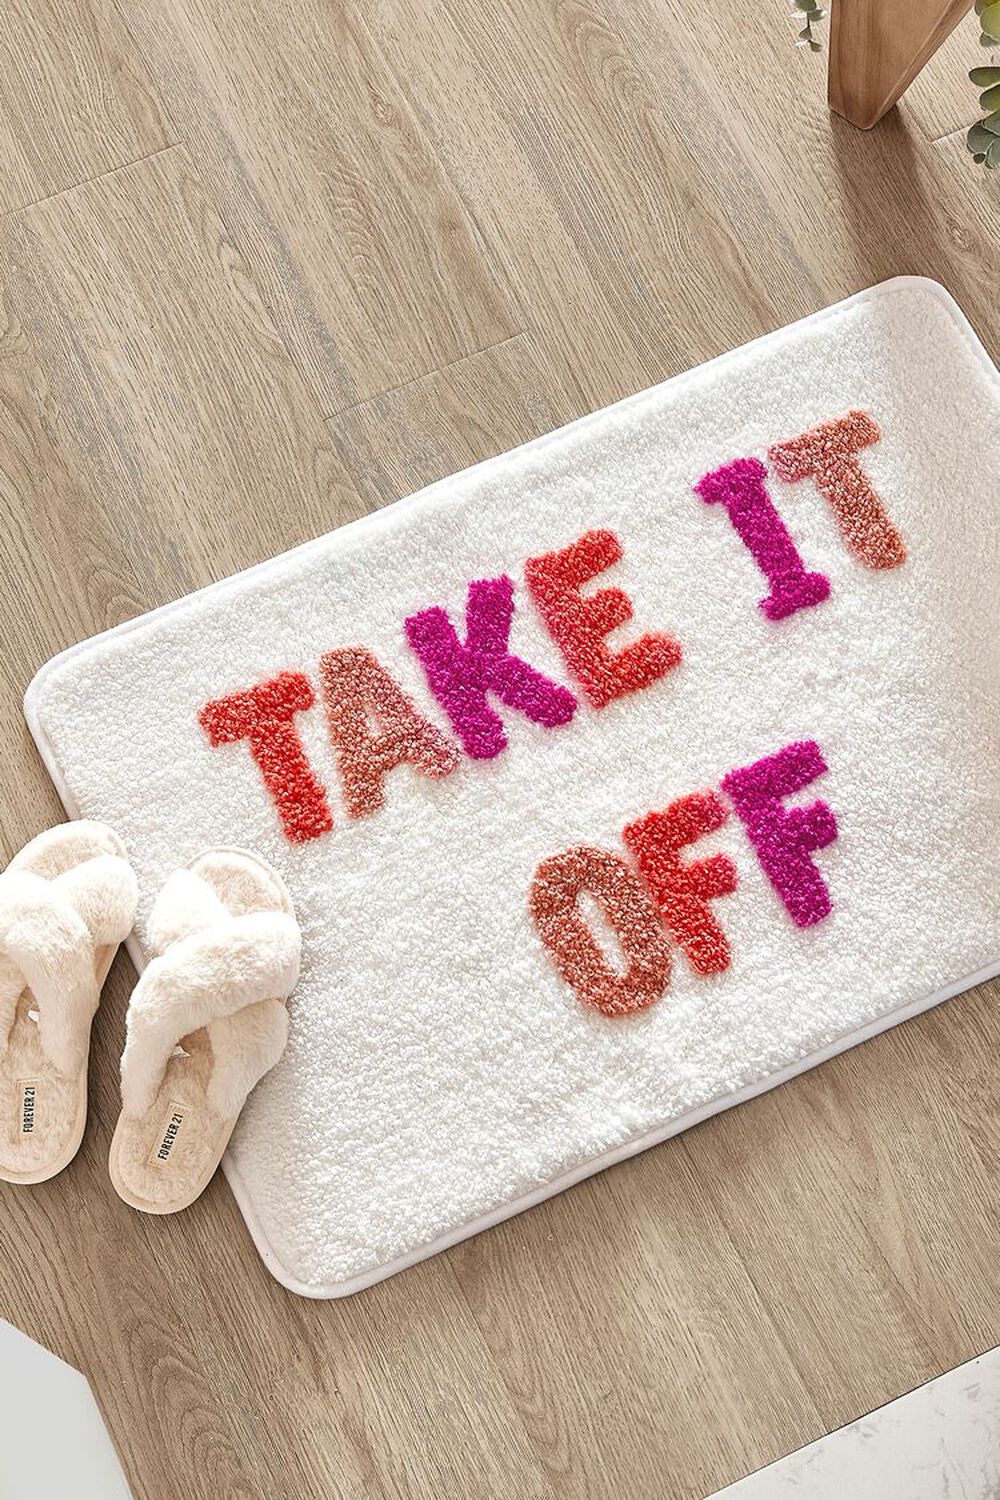 Forever 21 Take It Off Graphic Bath Mat